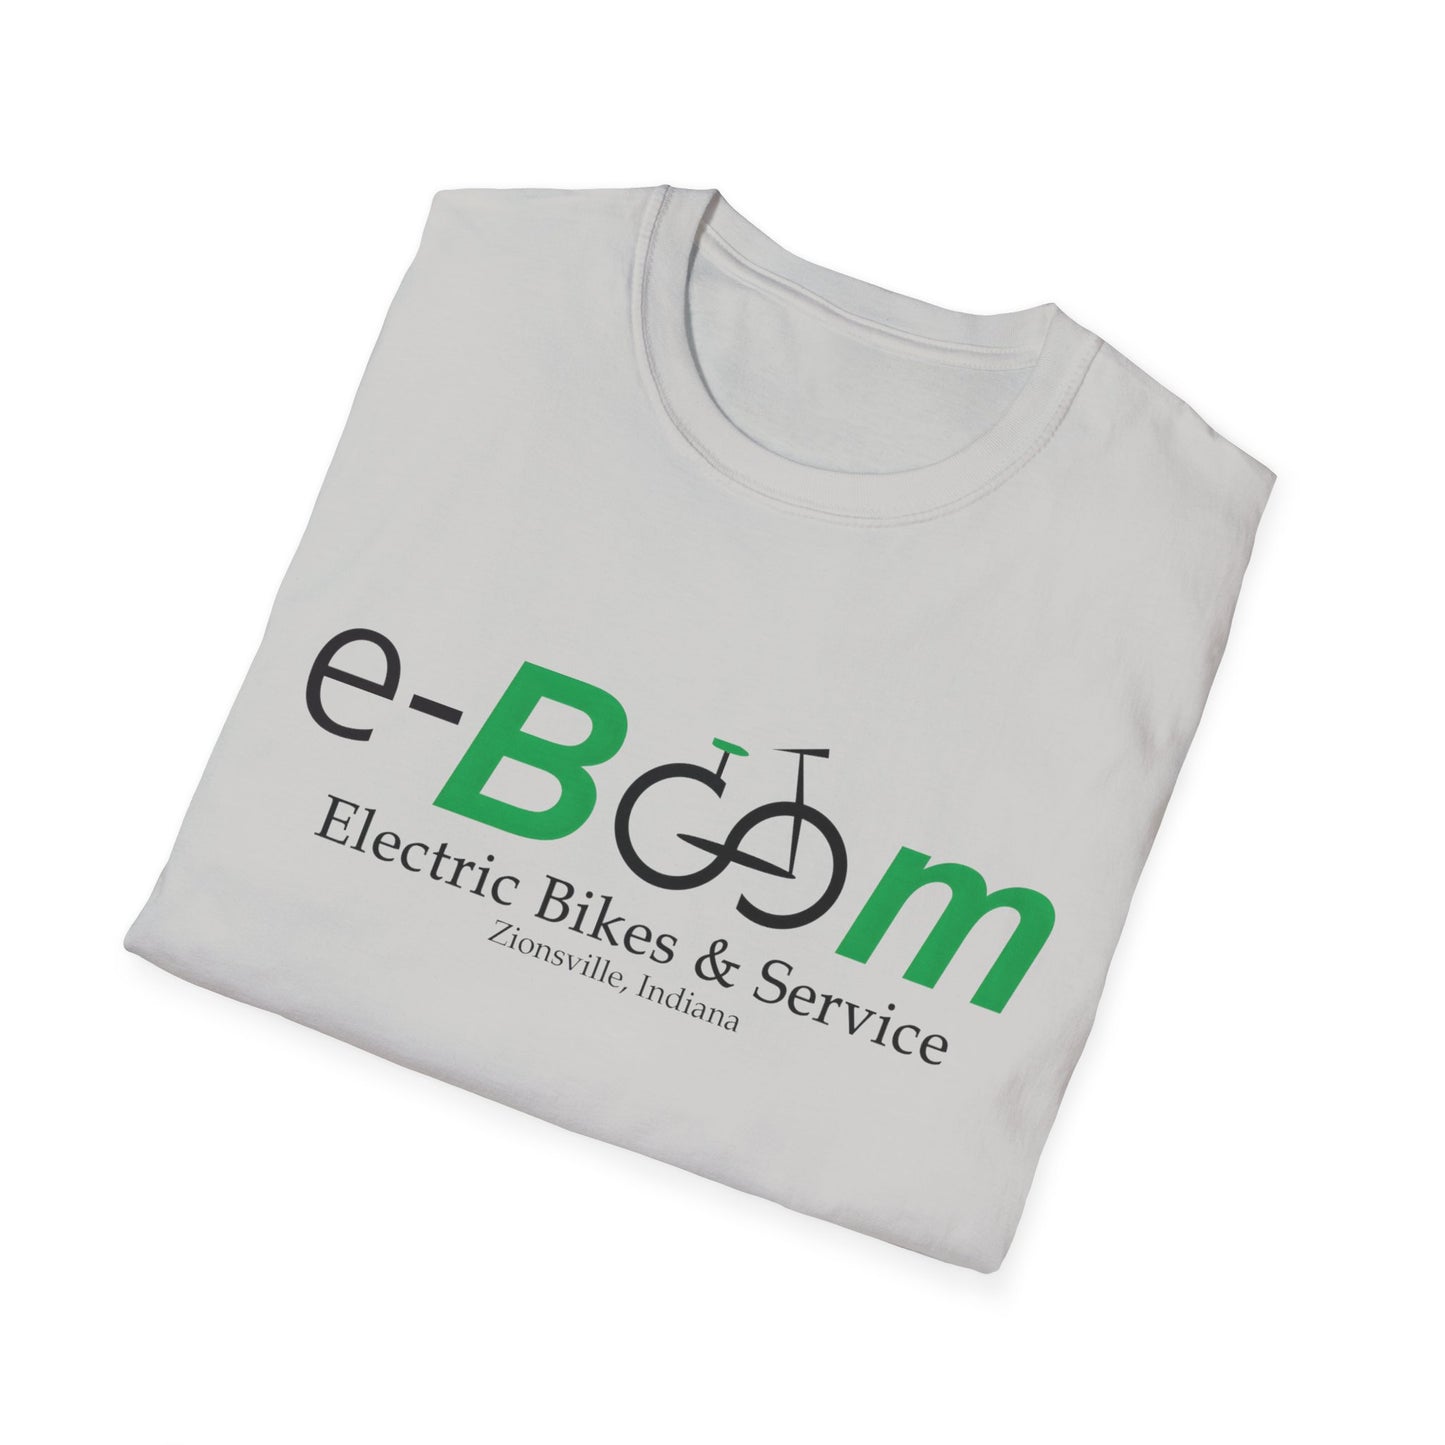 "Yes It's Electric. Yes I Passed You" (Back of shirt) Various colors. Unisex Softstyle T-Shirt